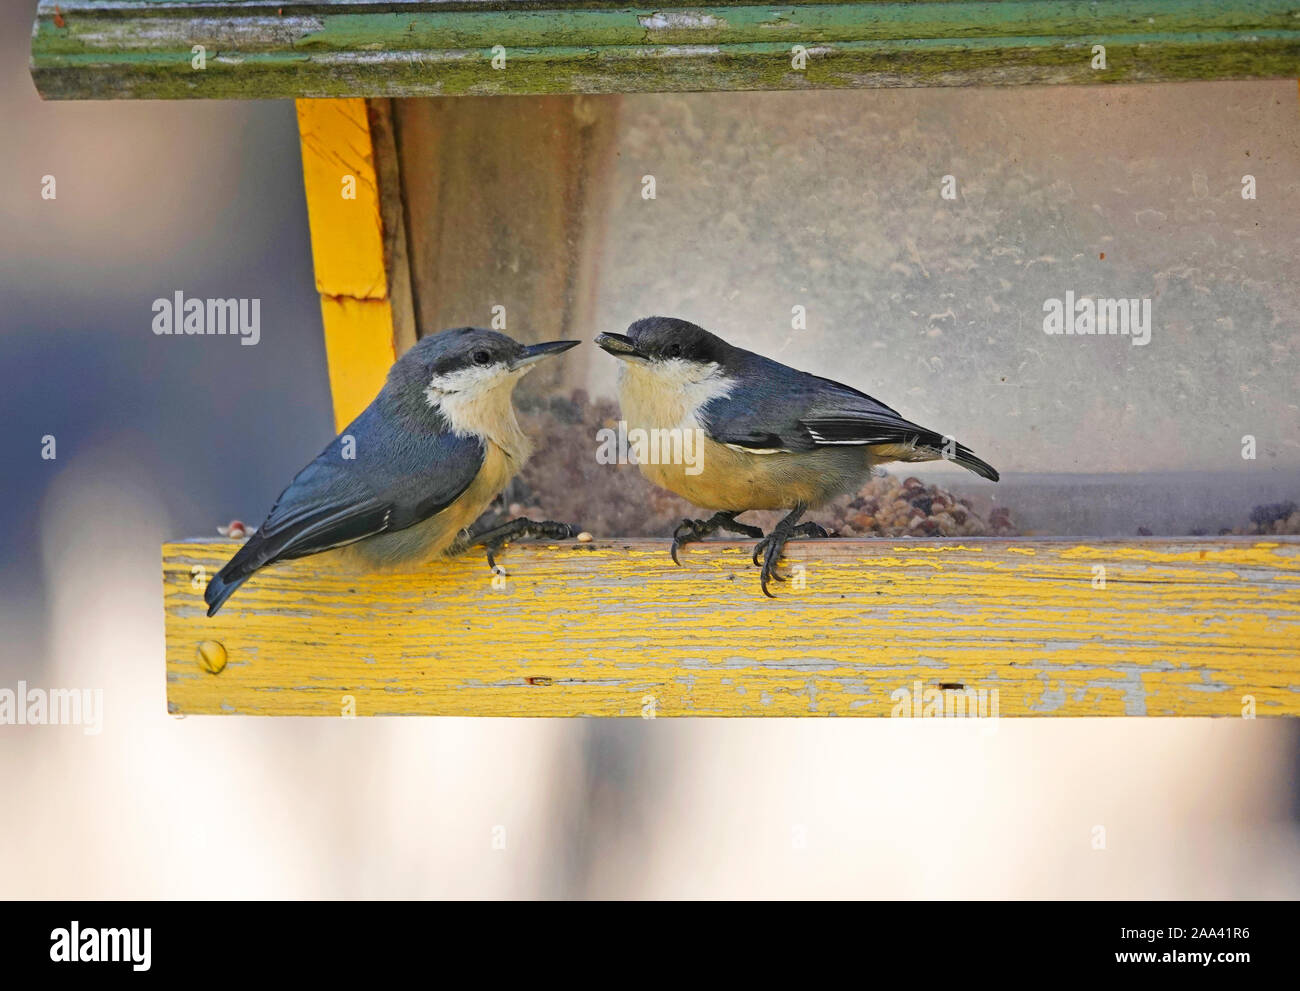 A pair of Pigmy Nuthatches, Sitta pygmaea, eating seeds at a bird feeder in central Oregon. The Pigmy Nuthatch is the smallest nuthatch. Stock Photo